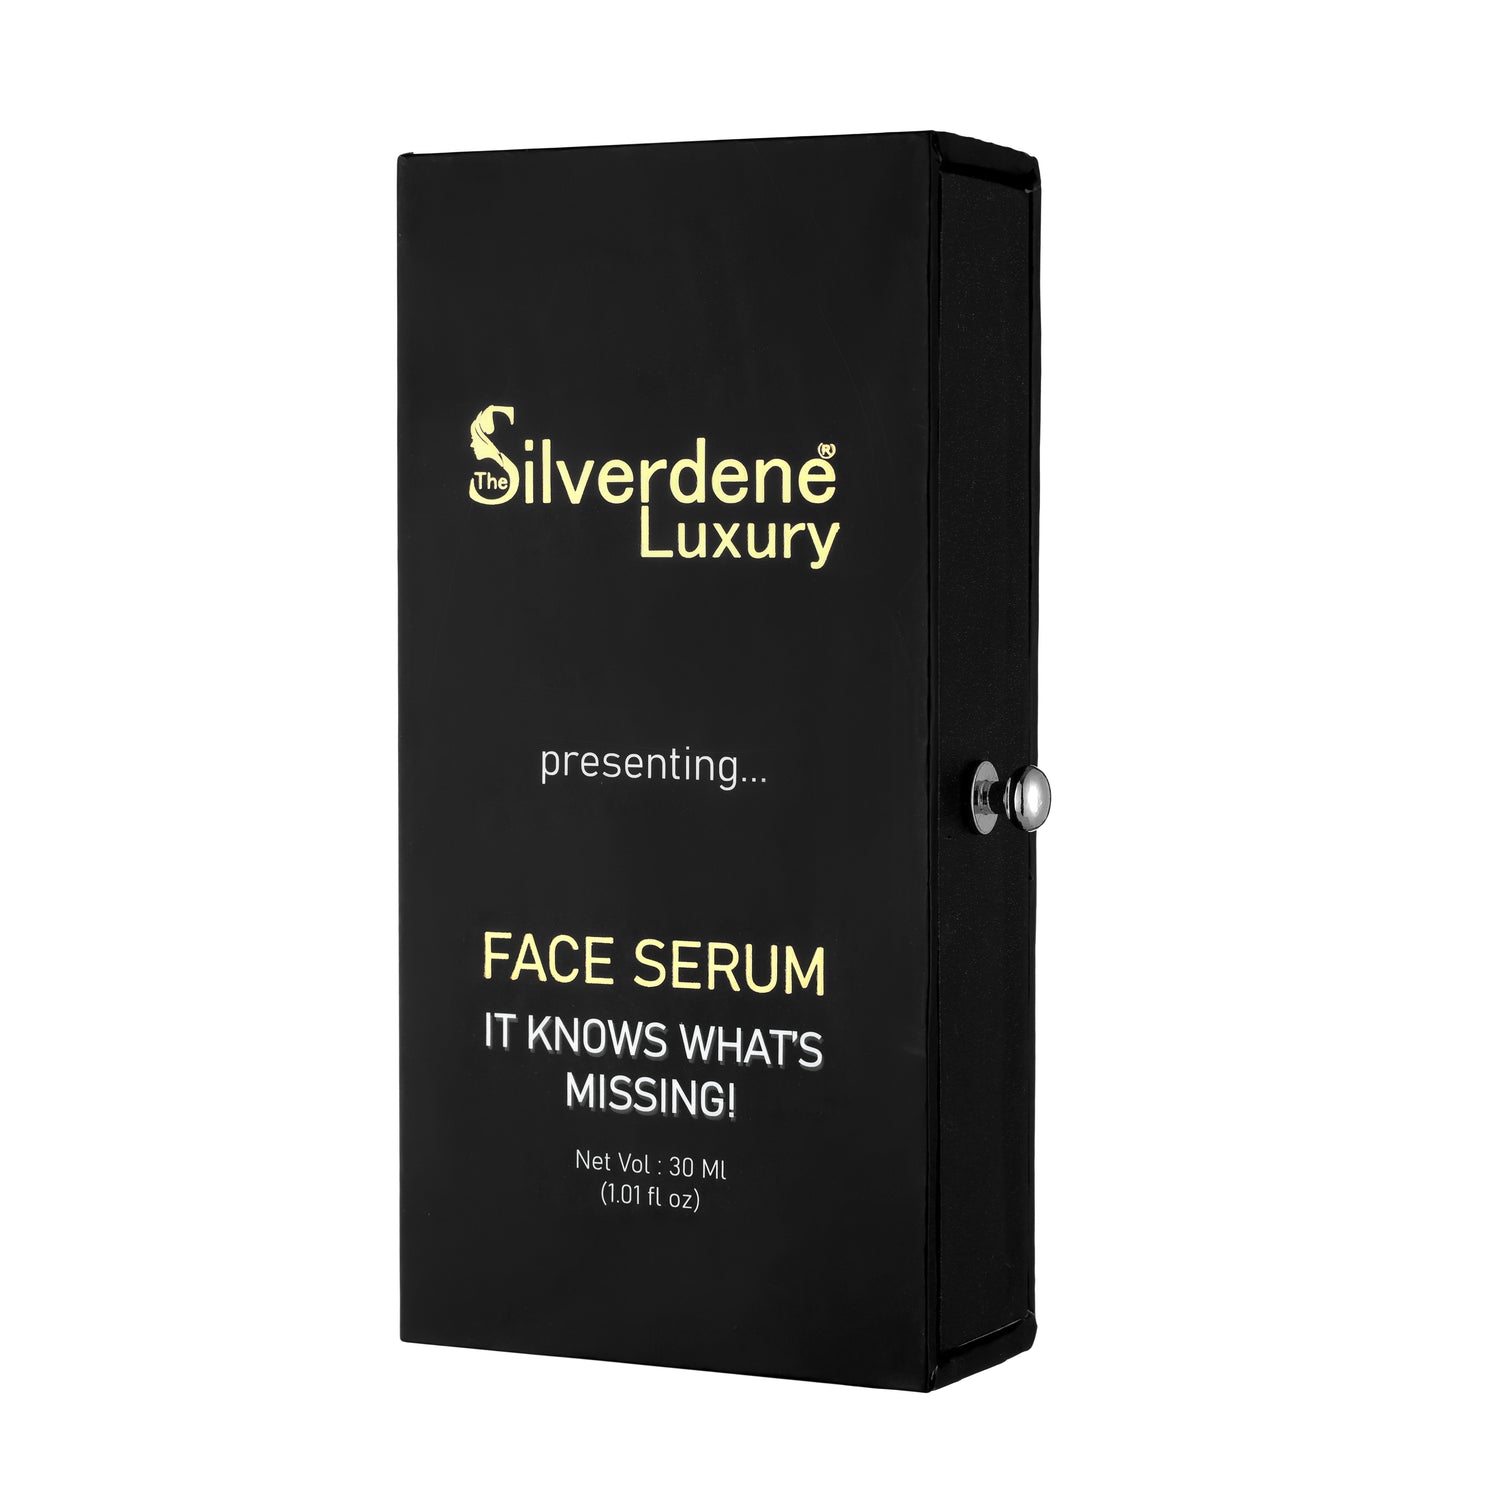 Face serum ~ It Knows What’s Missing